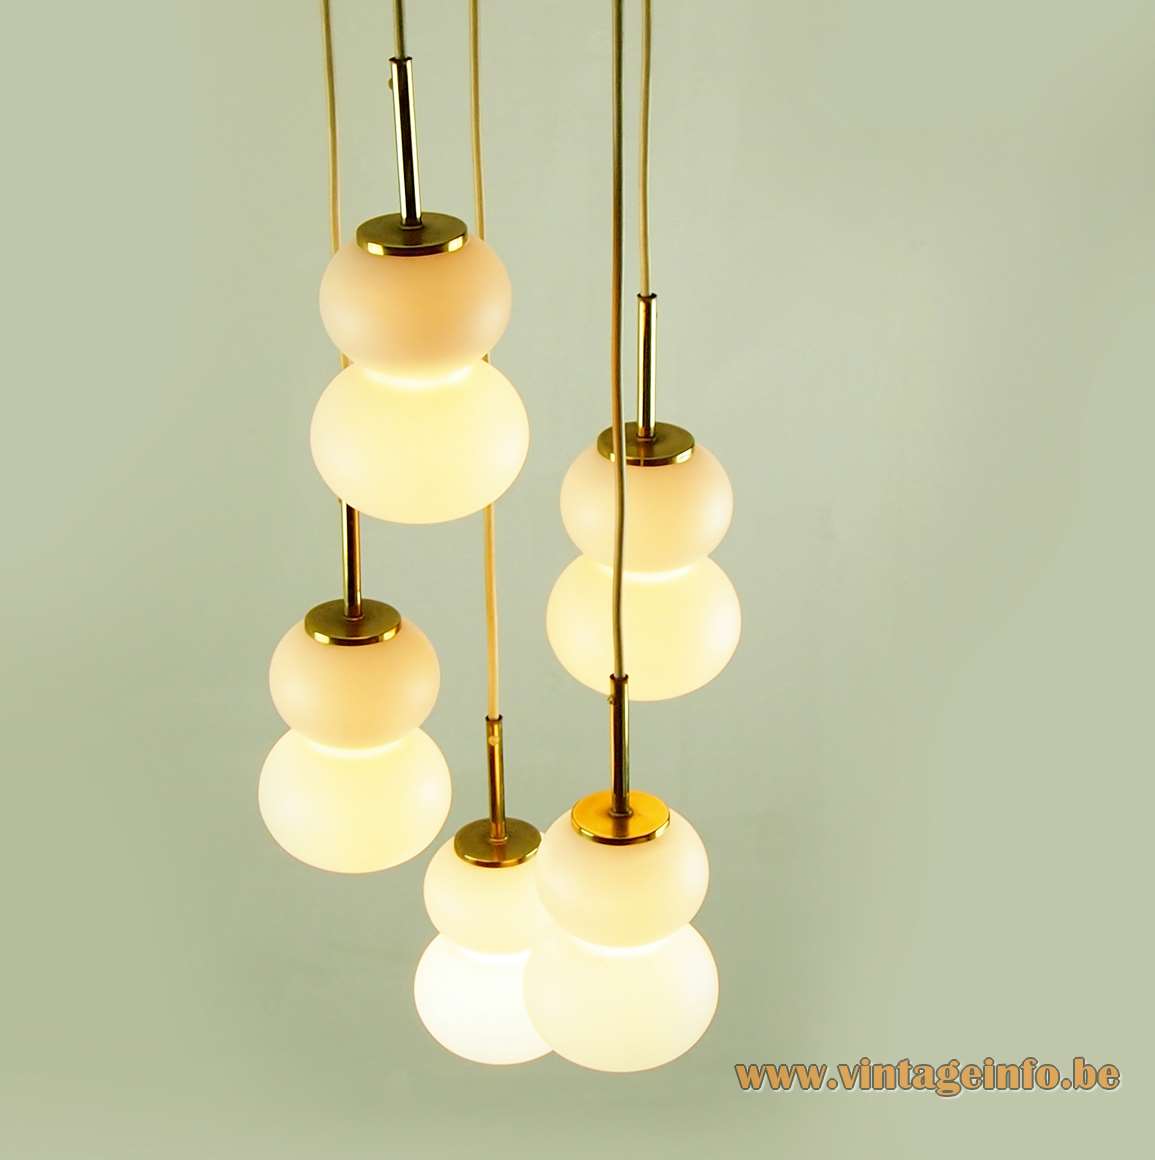 DORIA pumpkin cascade pendant chandelier 5 frosted glass calabash style globes brass rods 1960s 1970s Germany